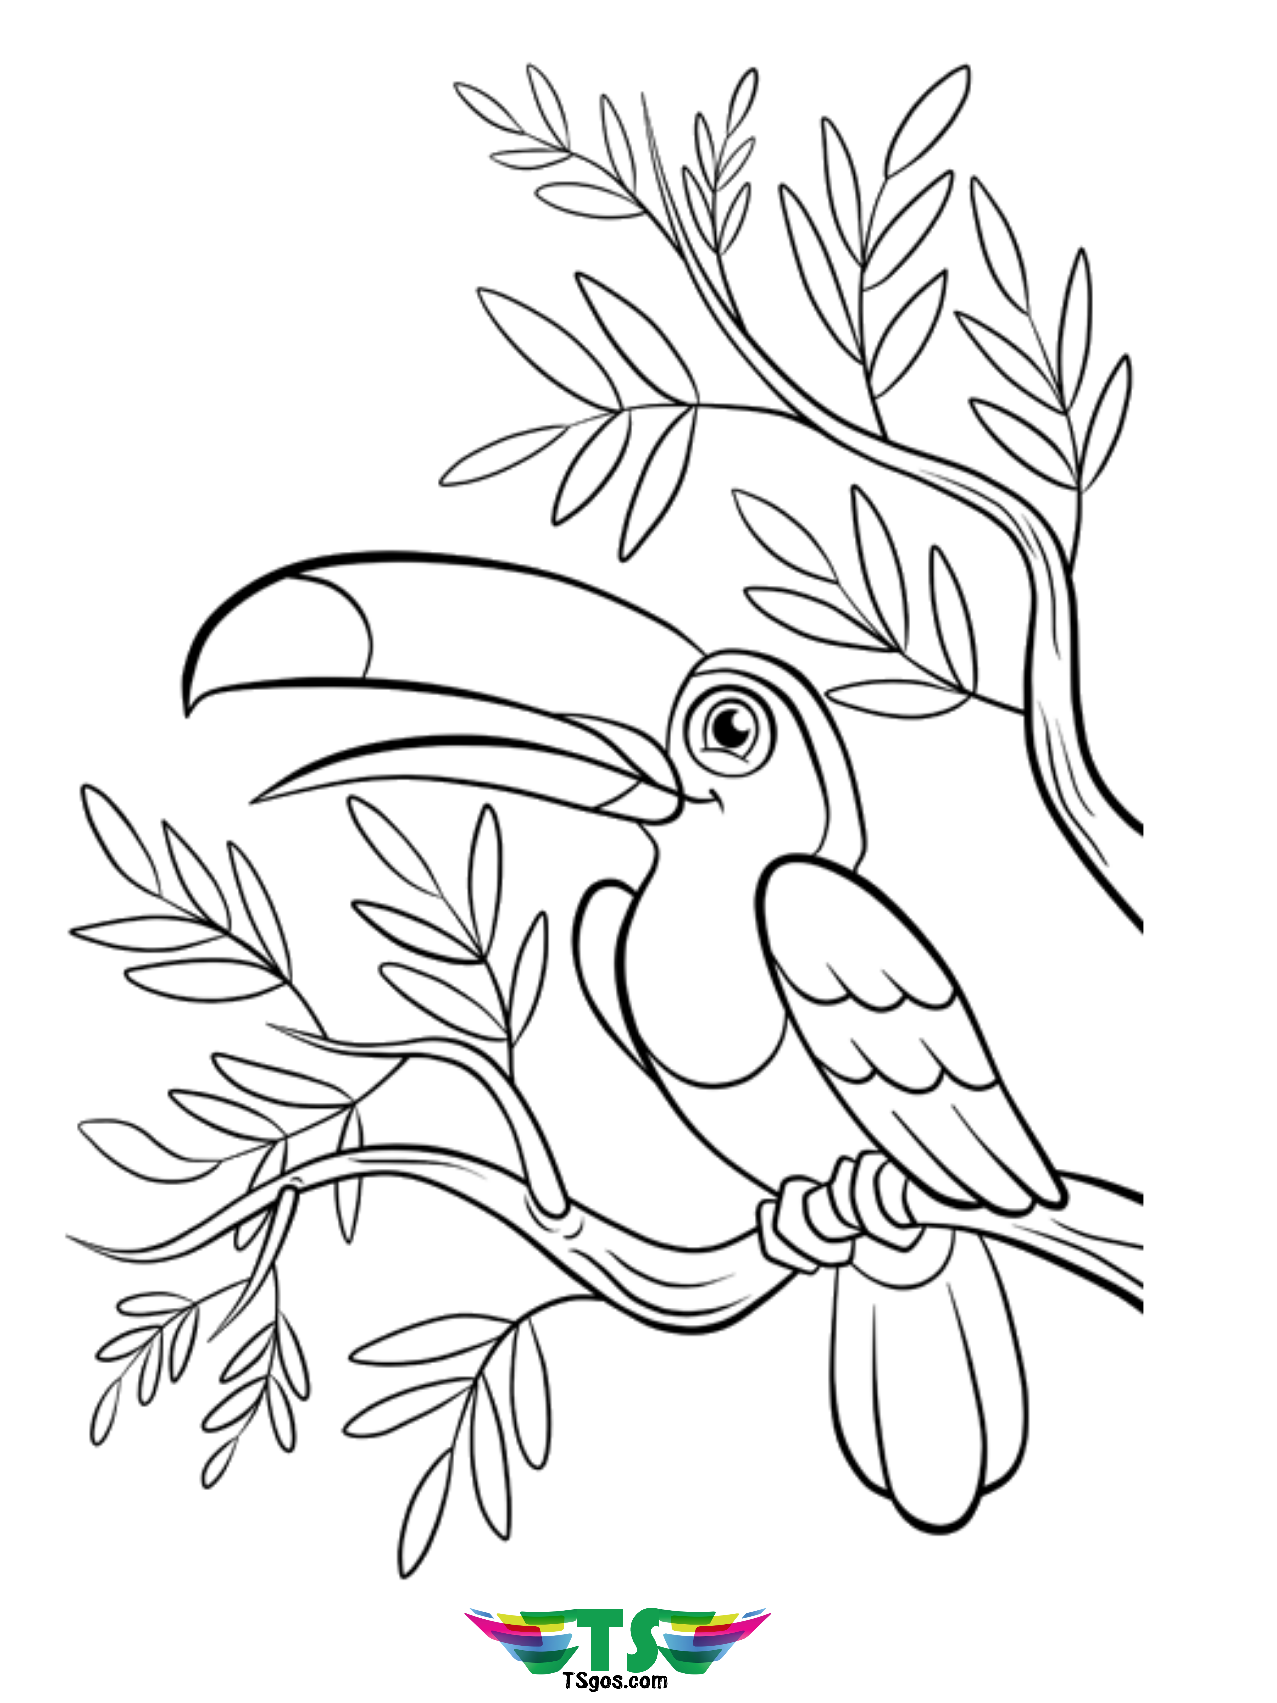 Beautiful bird coloring page free download.